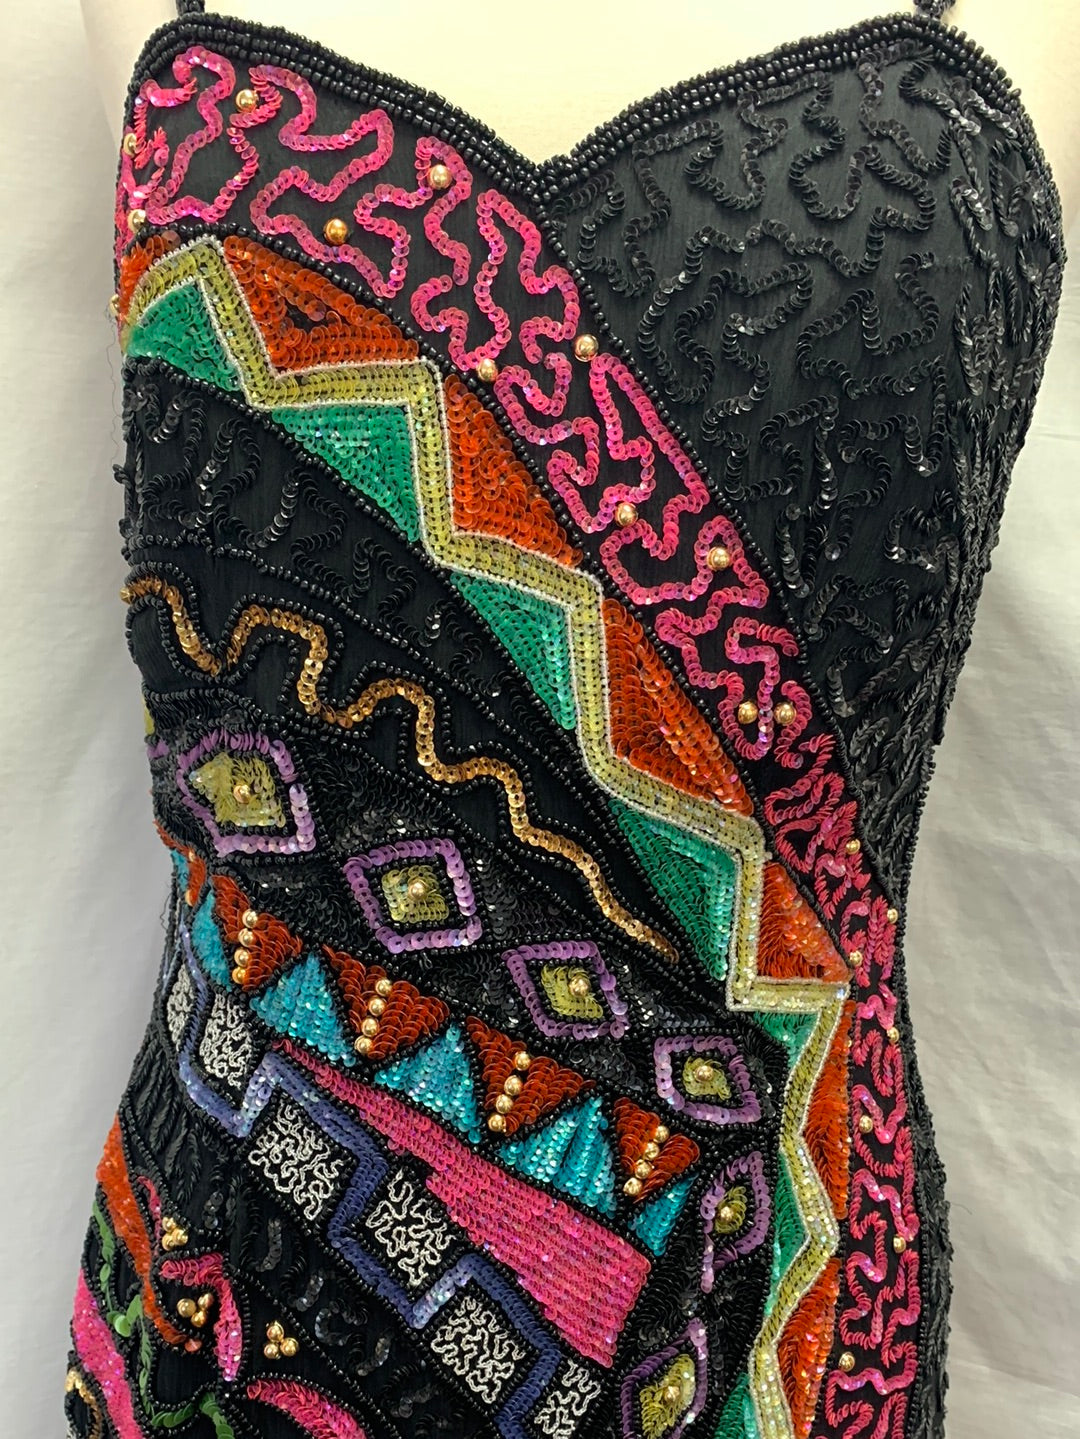 NWD - TOGETHER! black multi-color Sequin Bead 80s SILK Bodycon Dress - 8